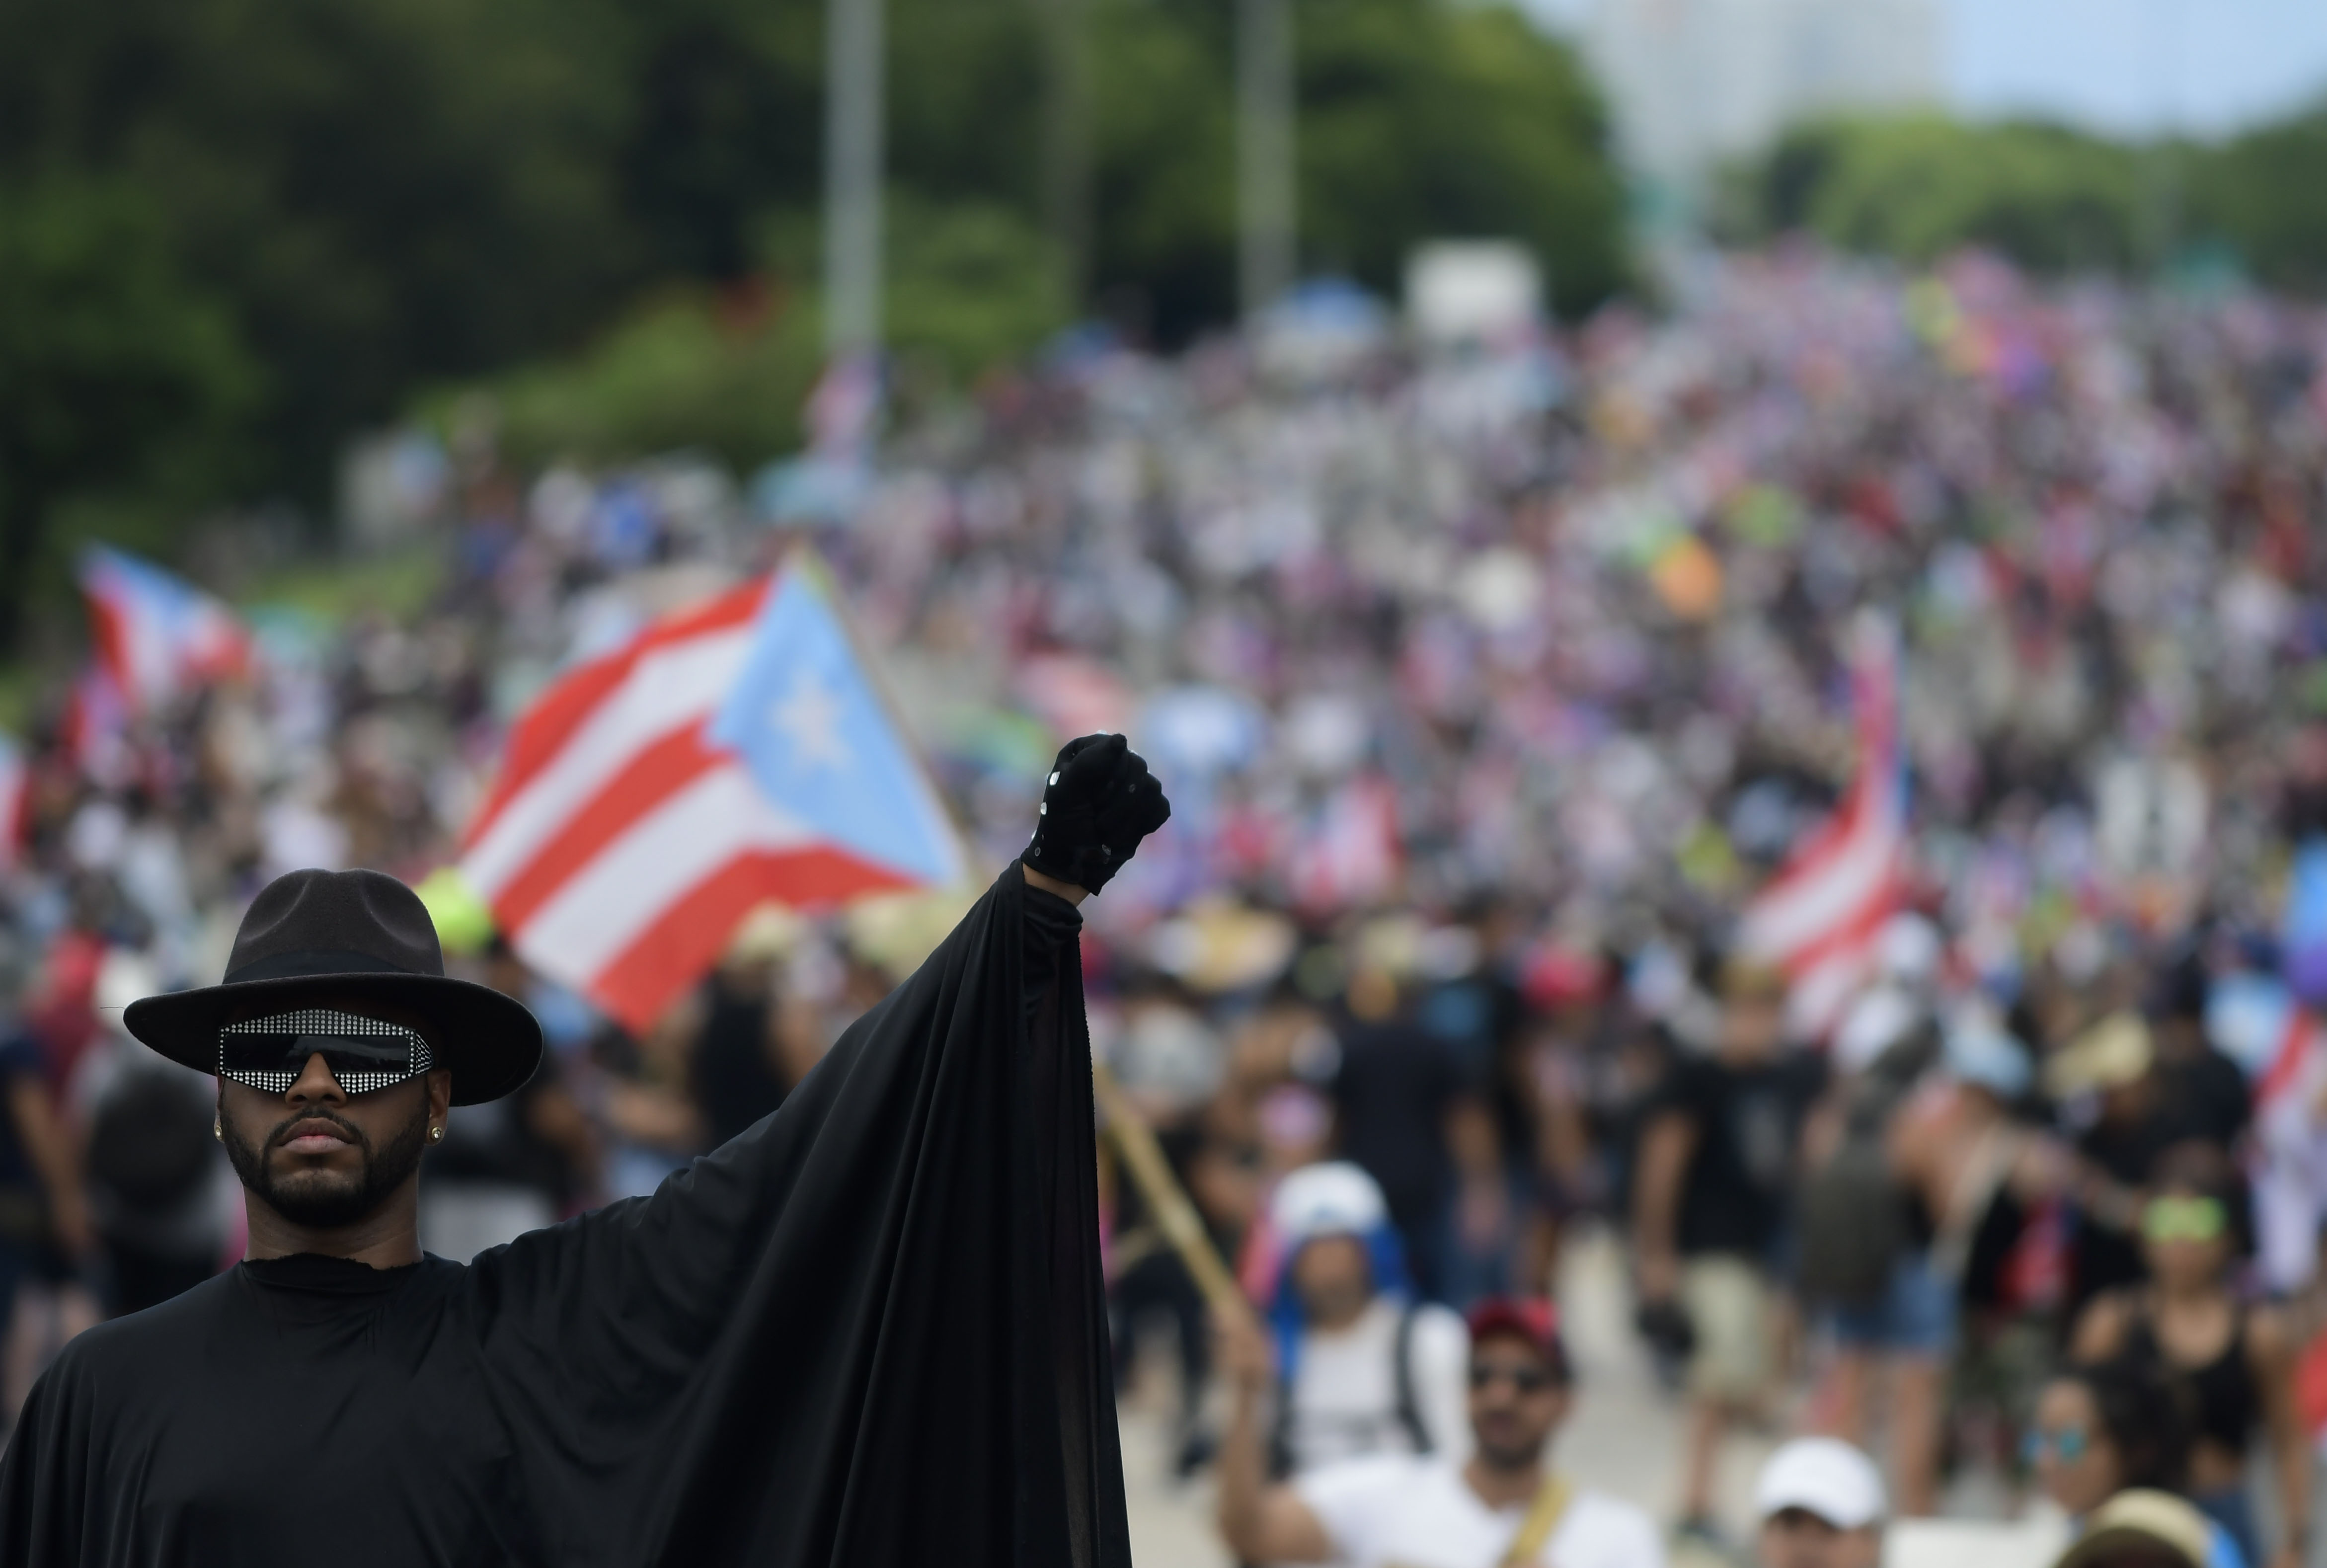 Demonstrators march on Las Americas highway during protest demanding the resignation of governor Ricardo Rossello, in San Juan, Puerto Rico, Monday, July 22, 2019. Protesters are demanding Rossello step down for his involvement in a private chat in which he used profanities to describe an ex-New York City councilwoman and a federal control board overseeing the island's finance. (AP Photo/Carlos Giusti)